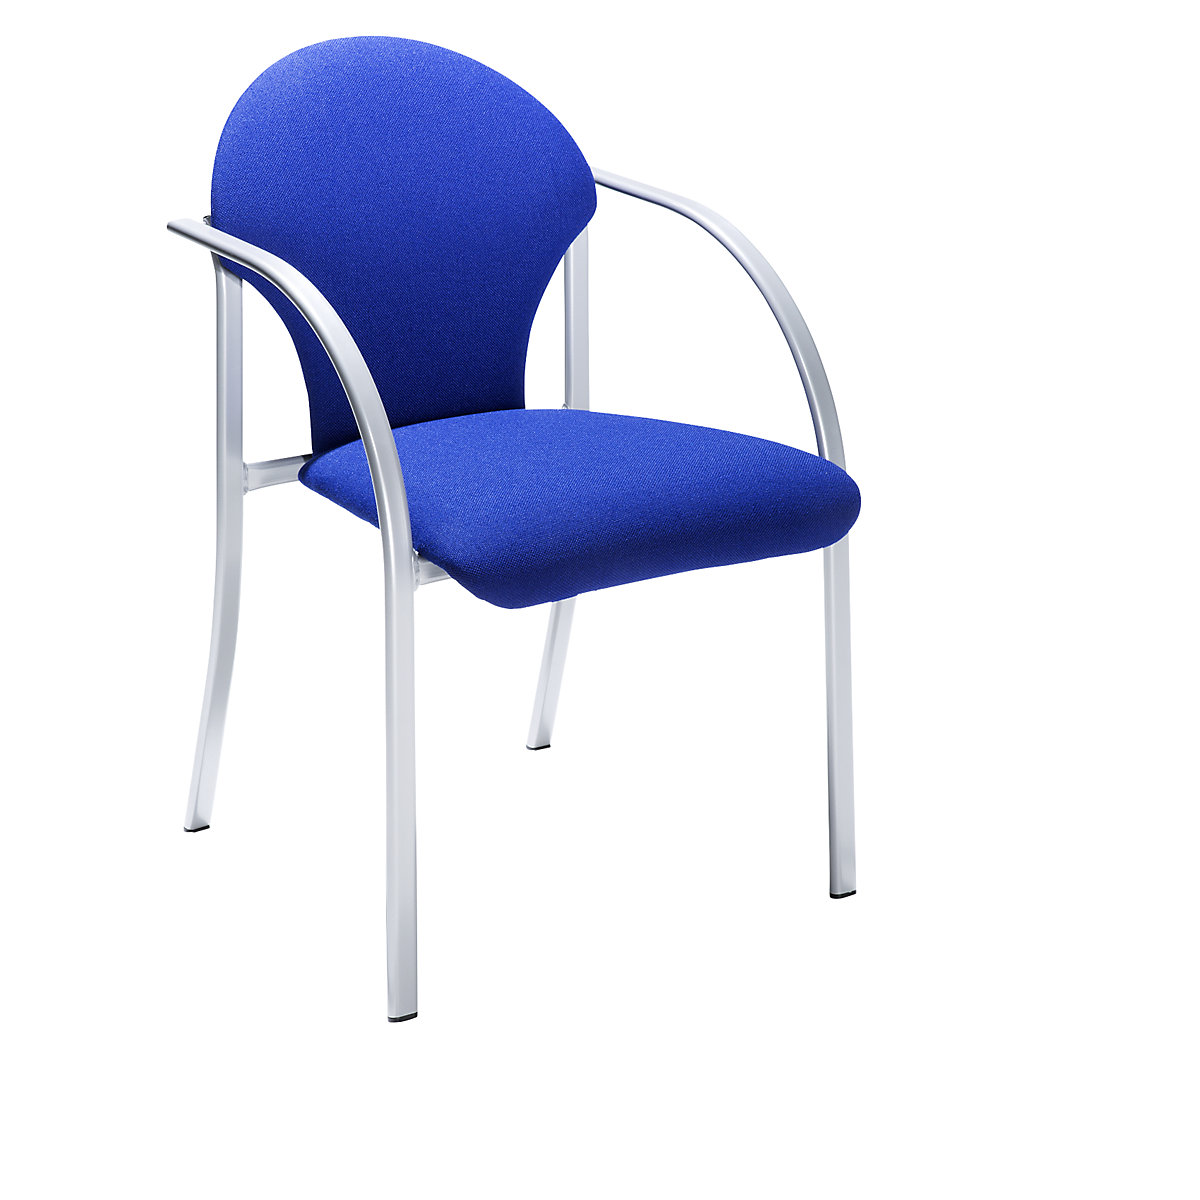 Padded stacking chair